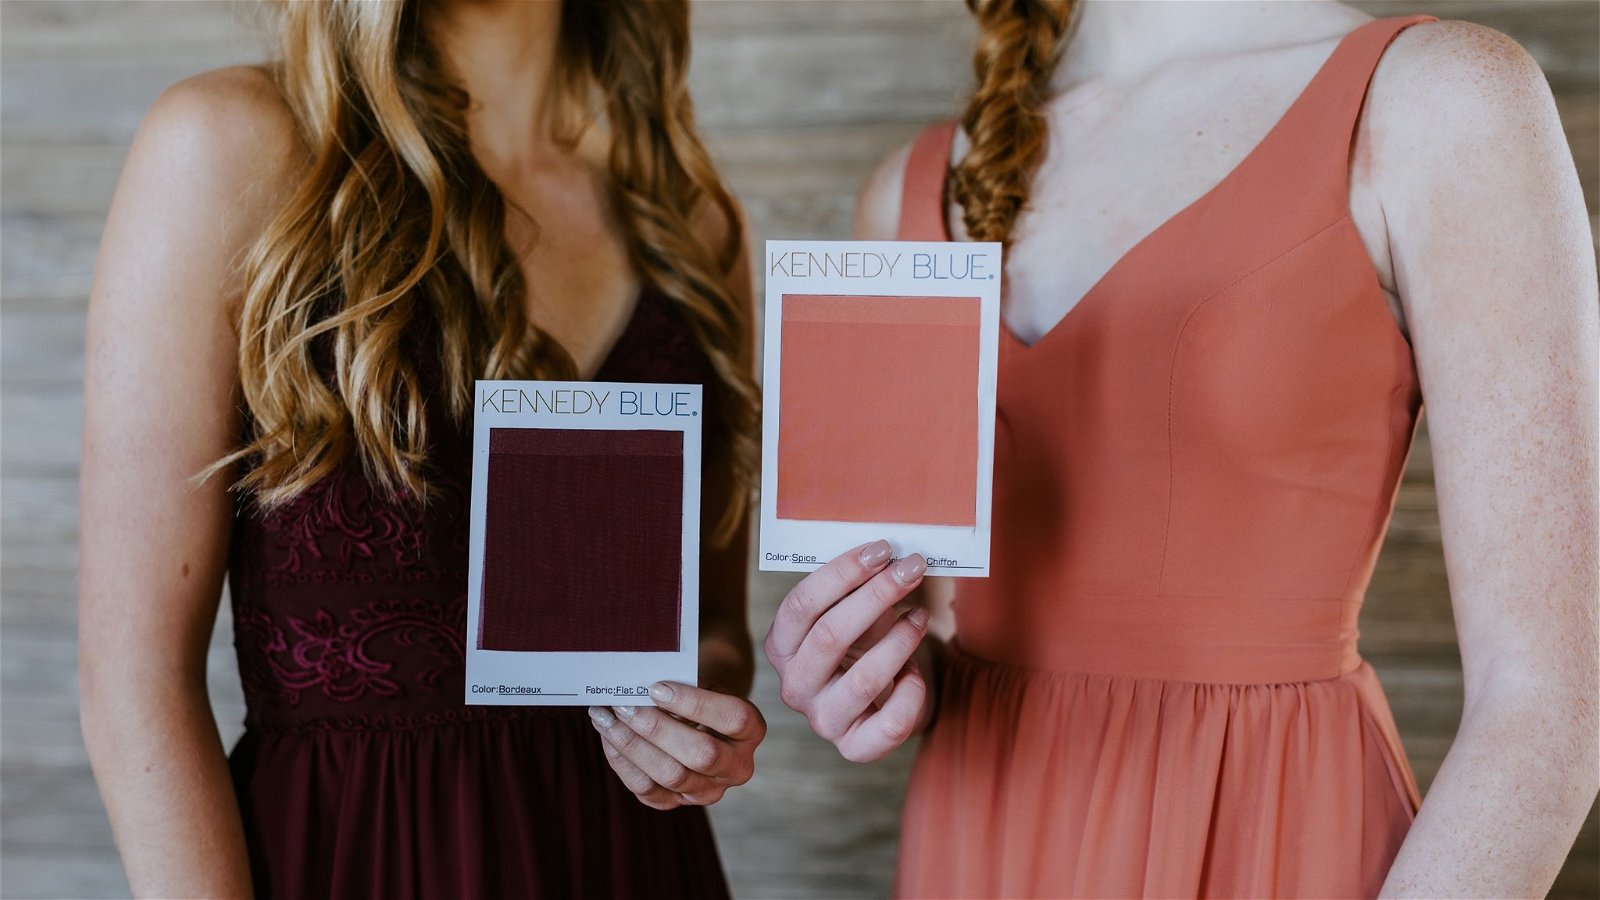 The Top 2022 Wedding Colors Announced ...